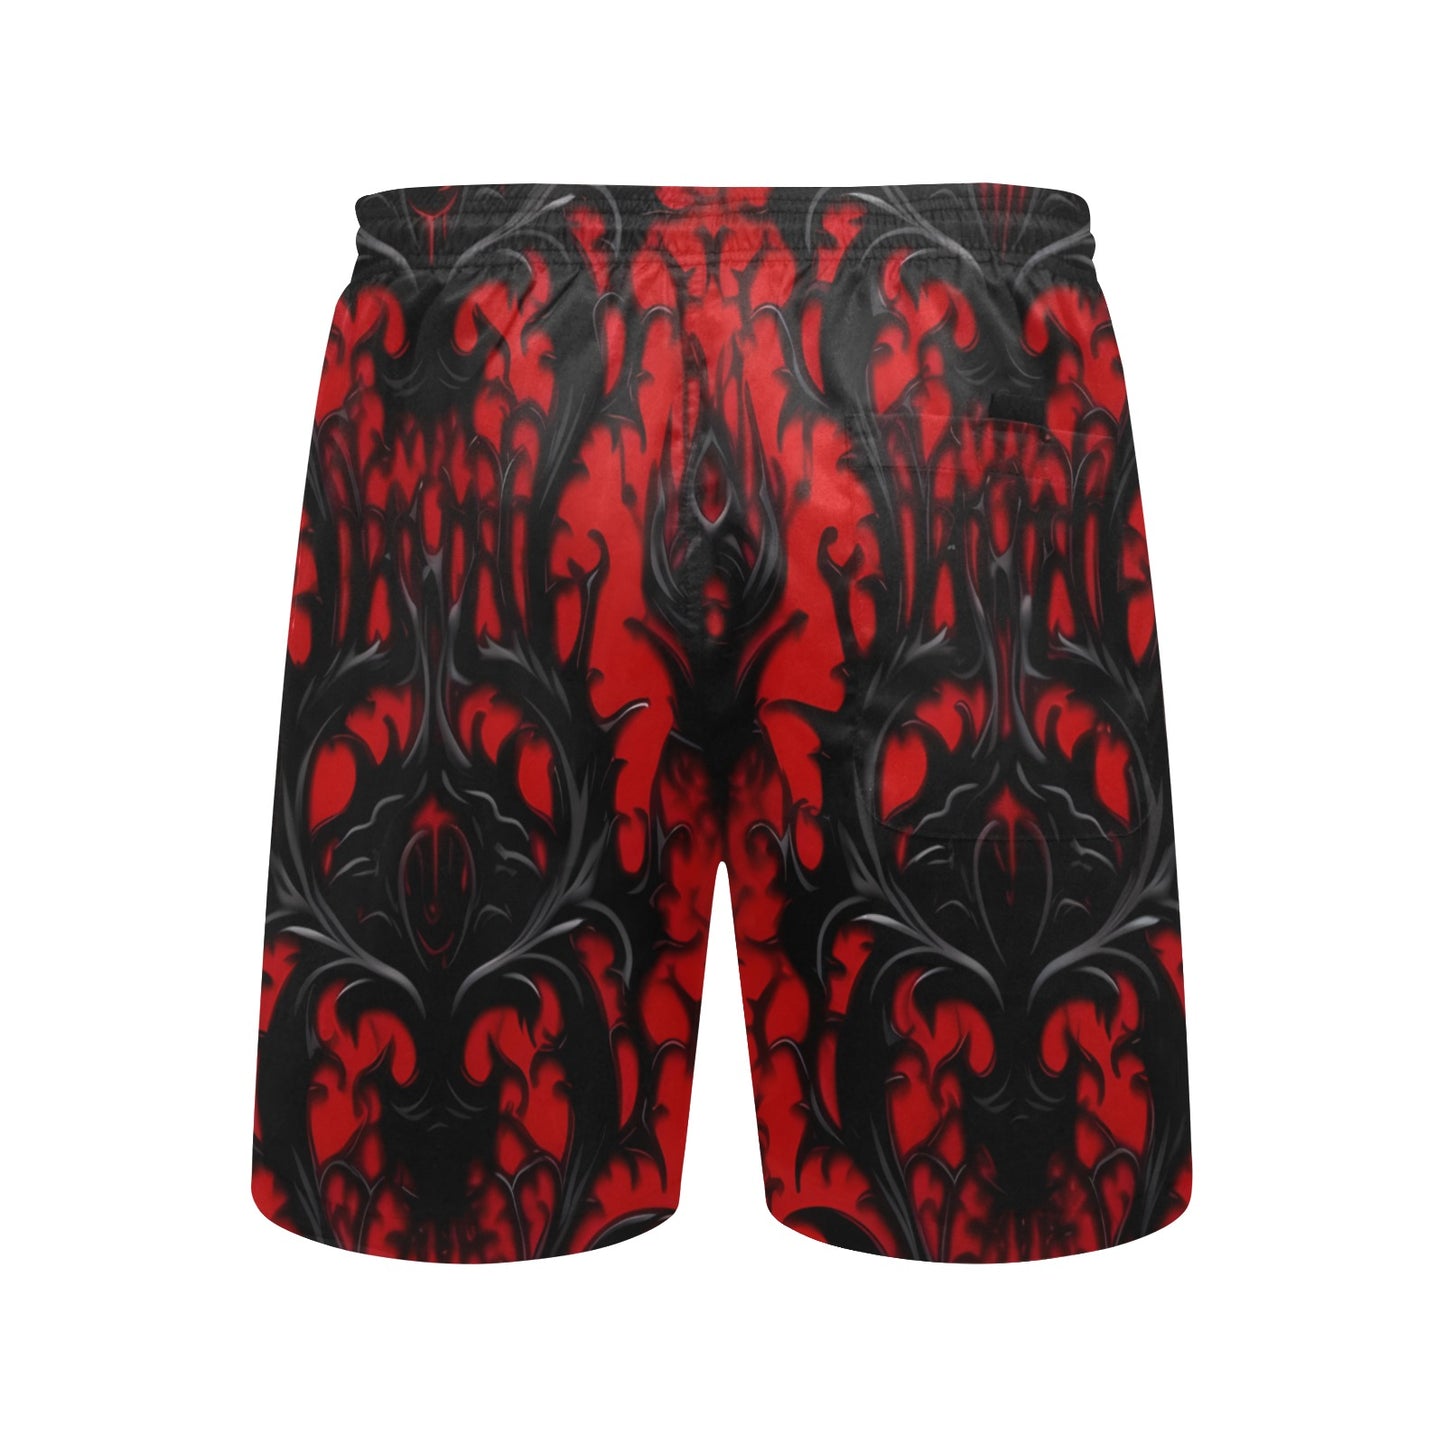 Gothic Red And Black Pattern Beach Shorts